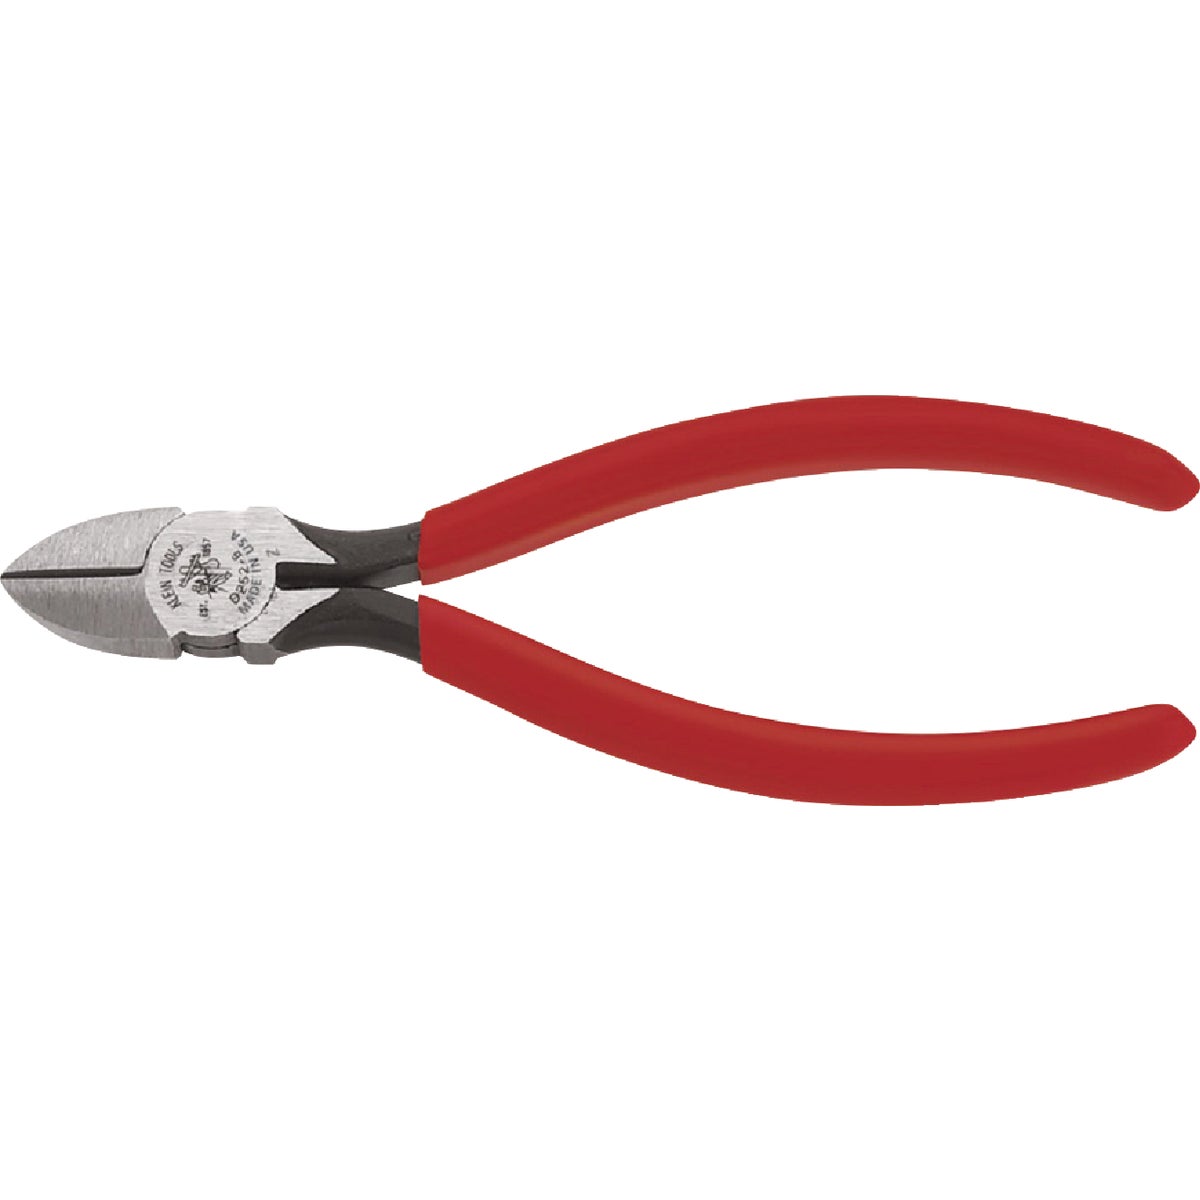 Item 317756, These Klein Tools Diagonal Cutting Pliers are all-purpose, heavy-duty 